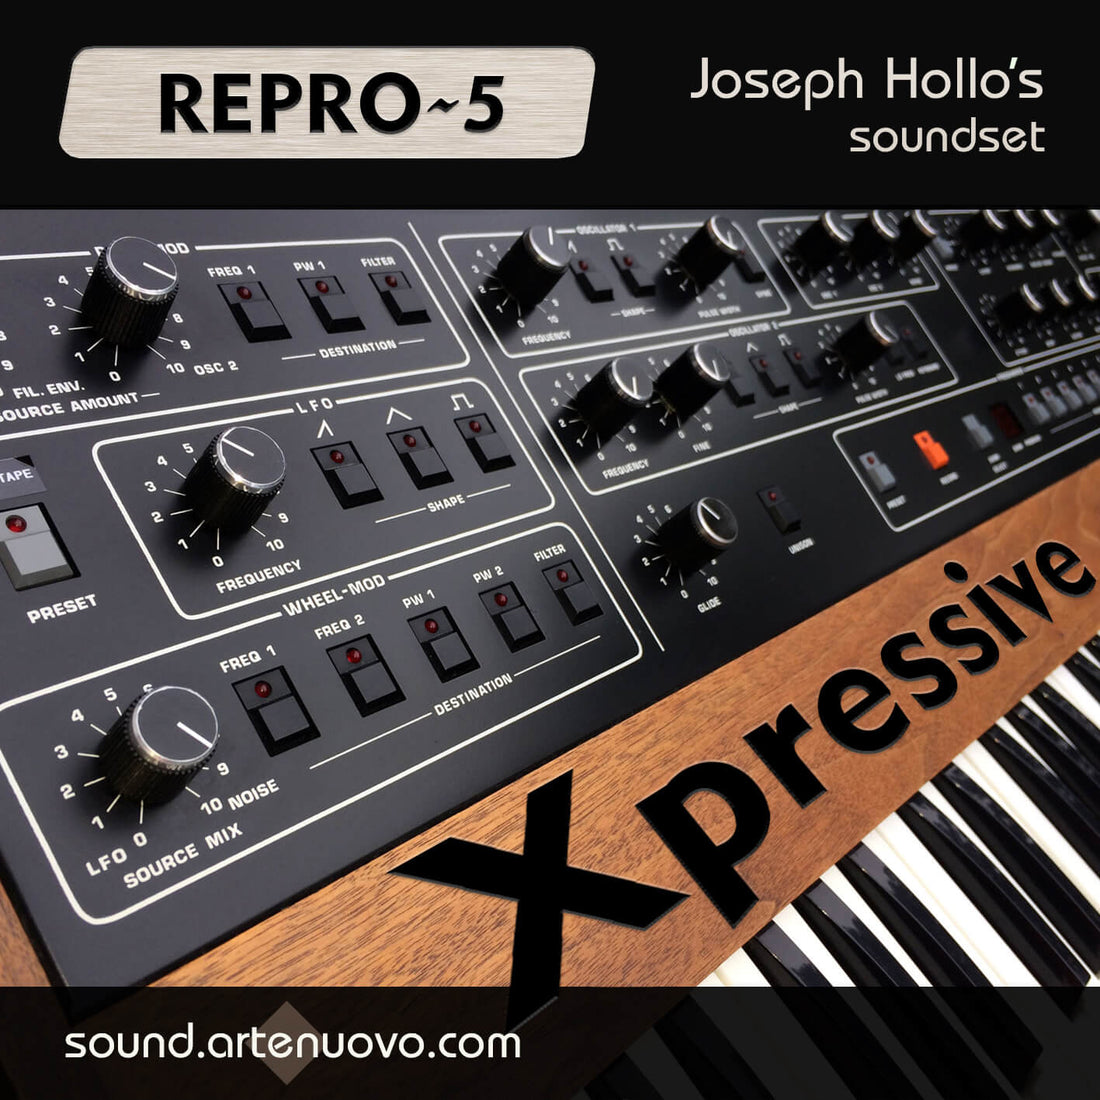 A stunning Repro-5 sound pack | Xpressive - 68 Repro-5 Presets